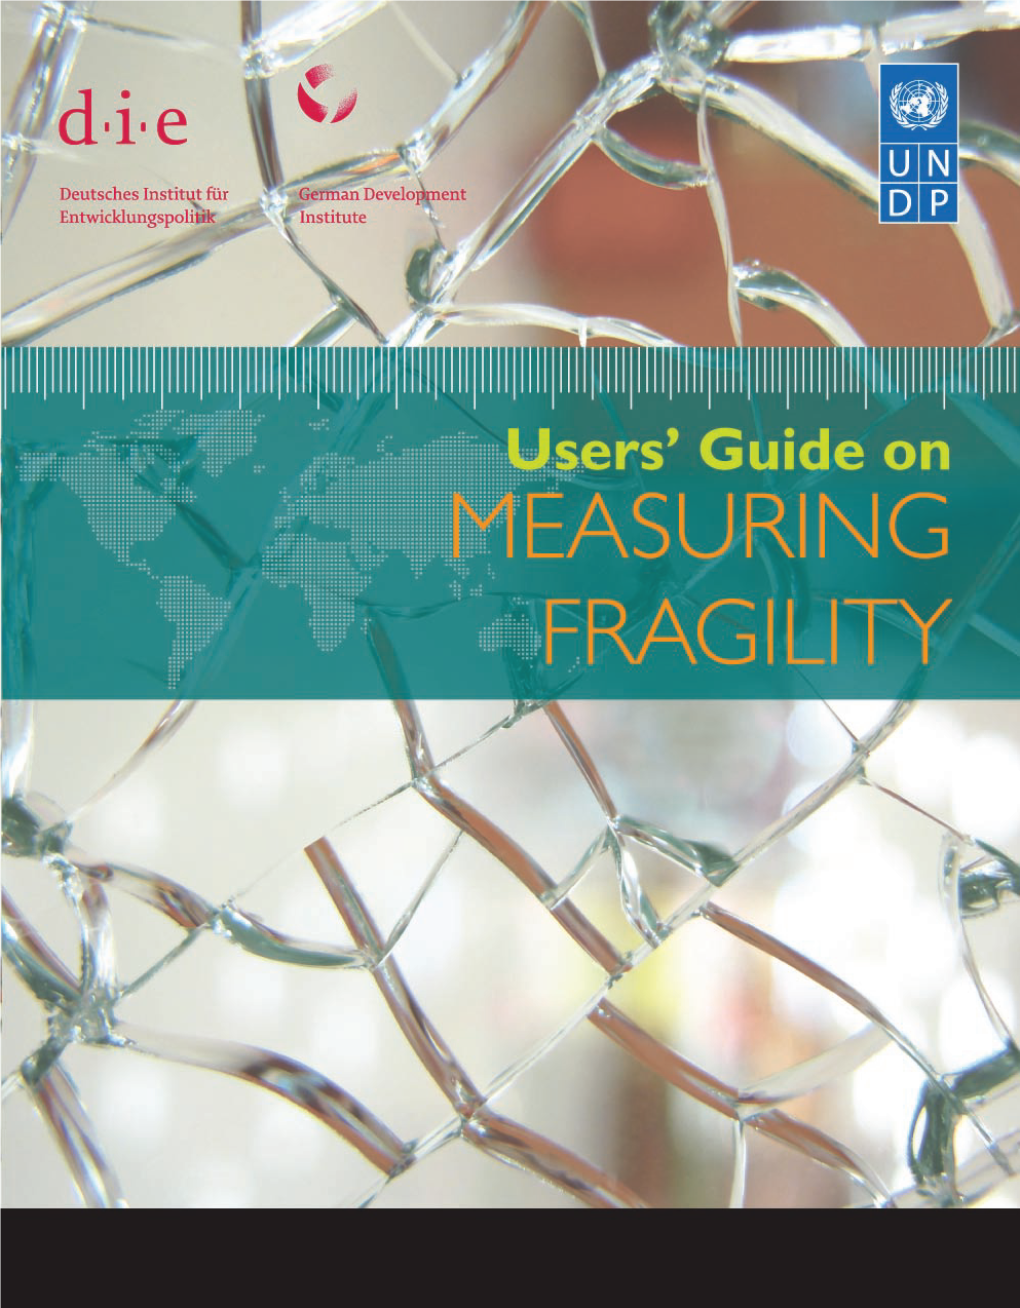 Users' Guide on Measuring Fragility